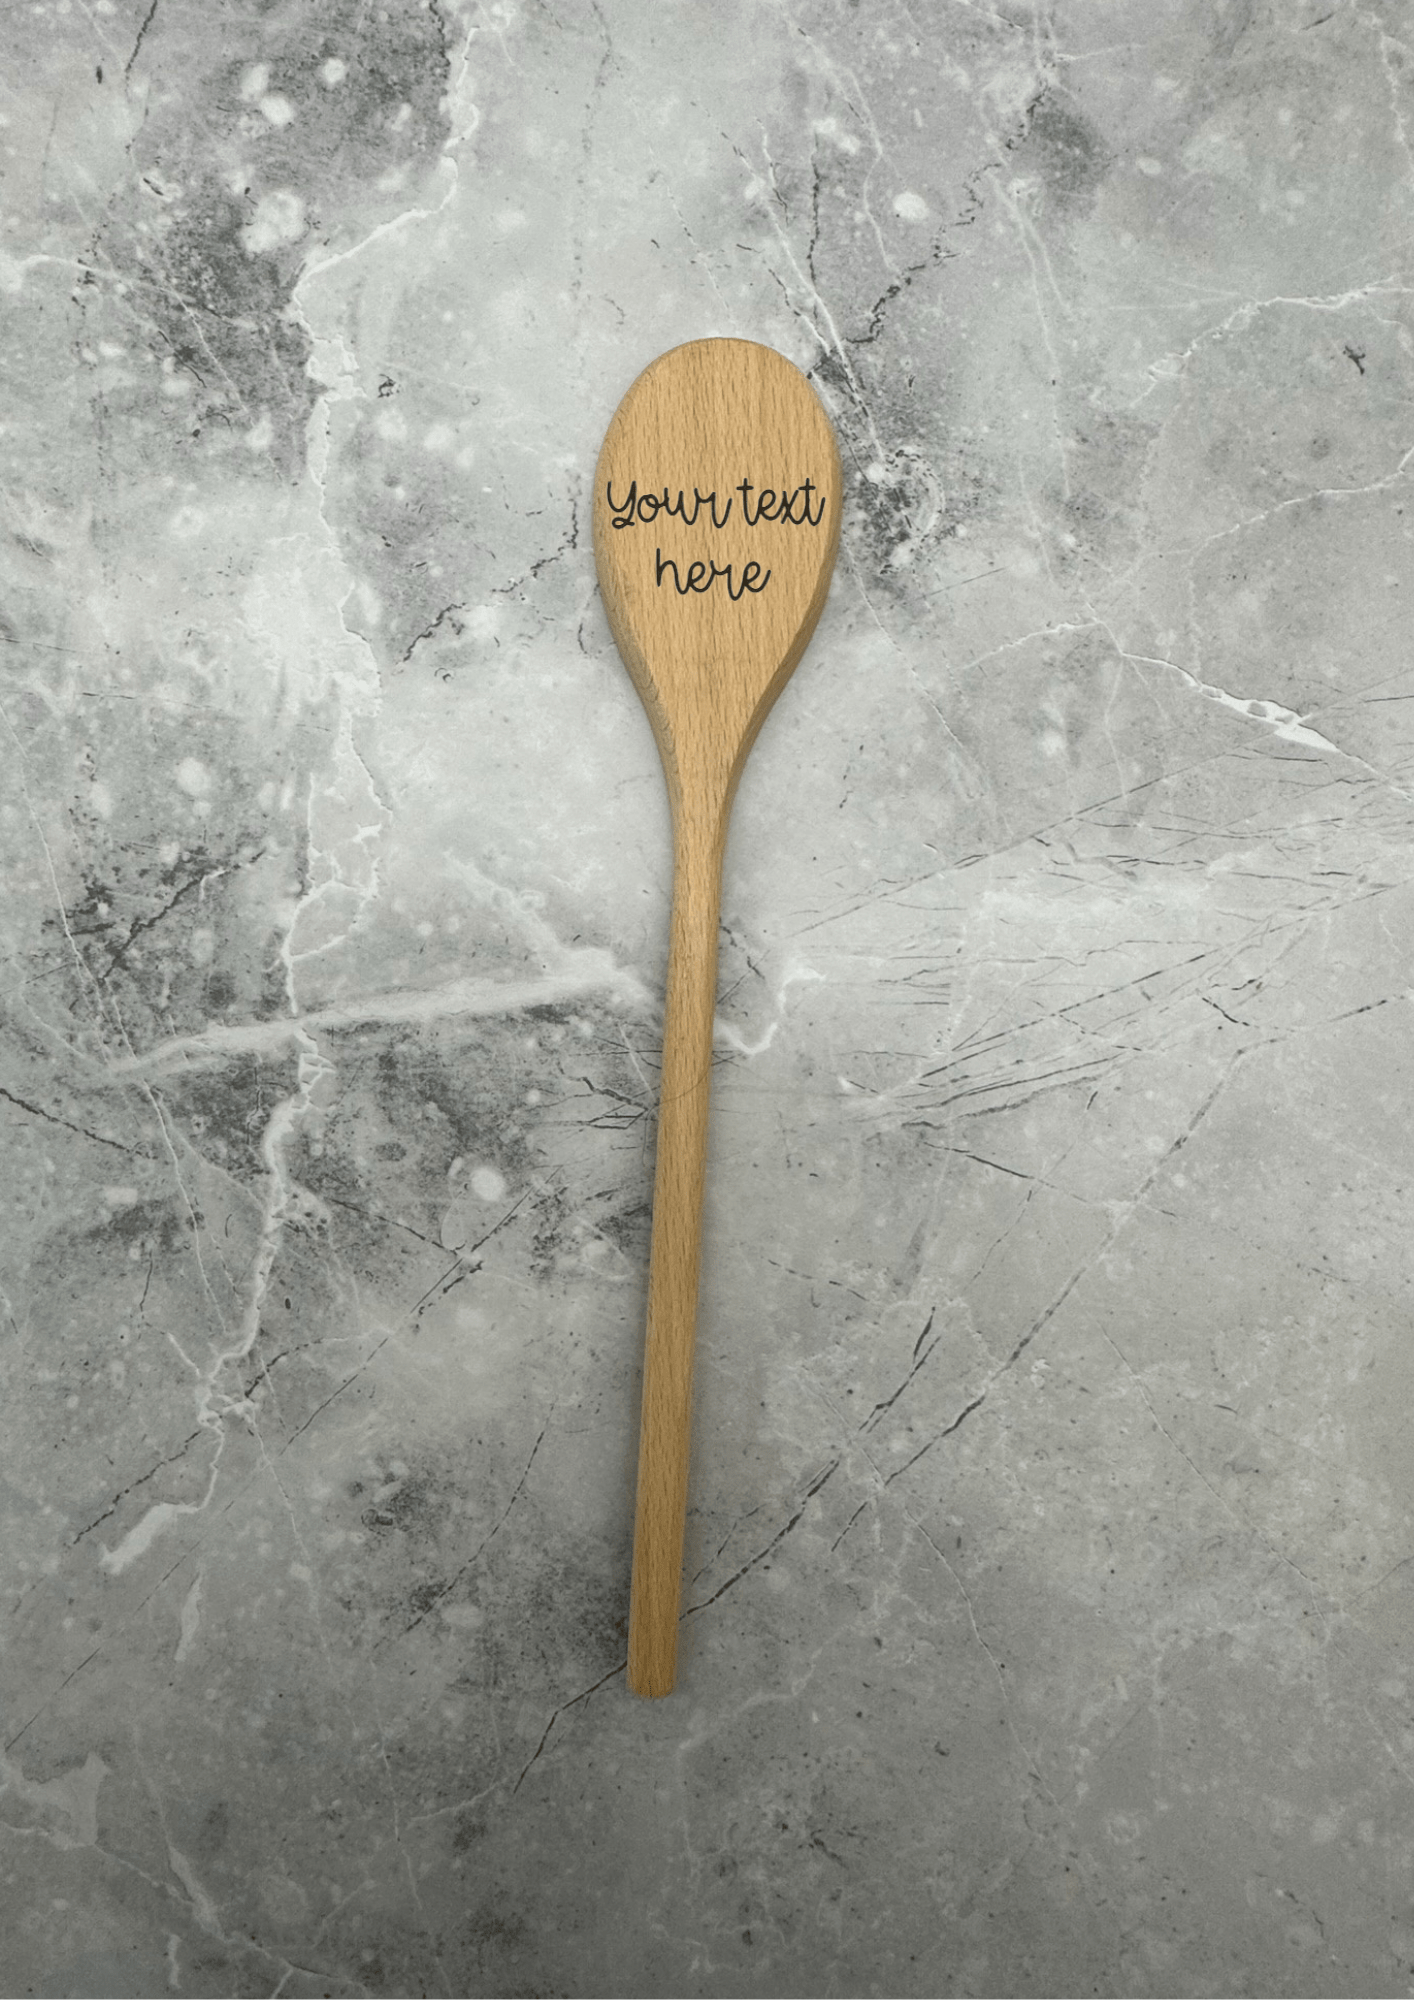 Lua Nova Wooden Spoon Personalised Wooden Spoon - Your Text Here